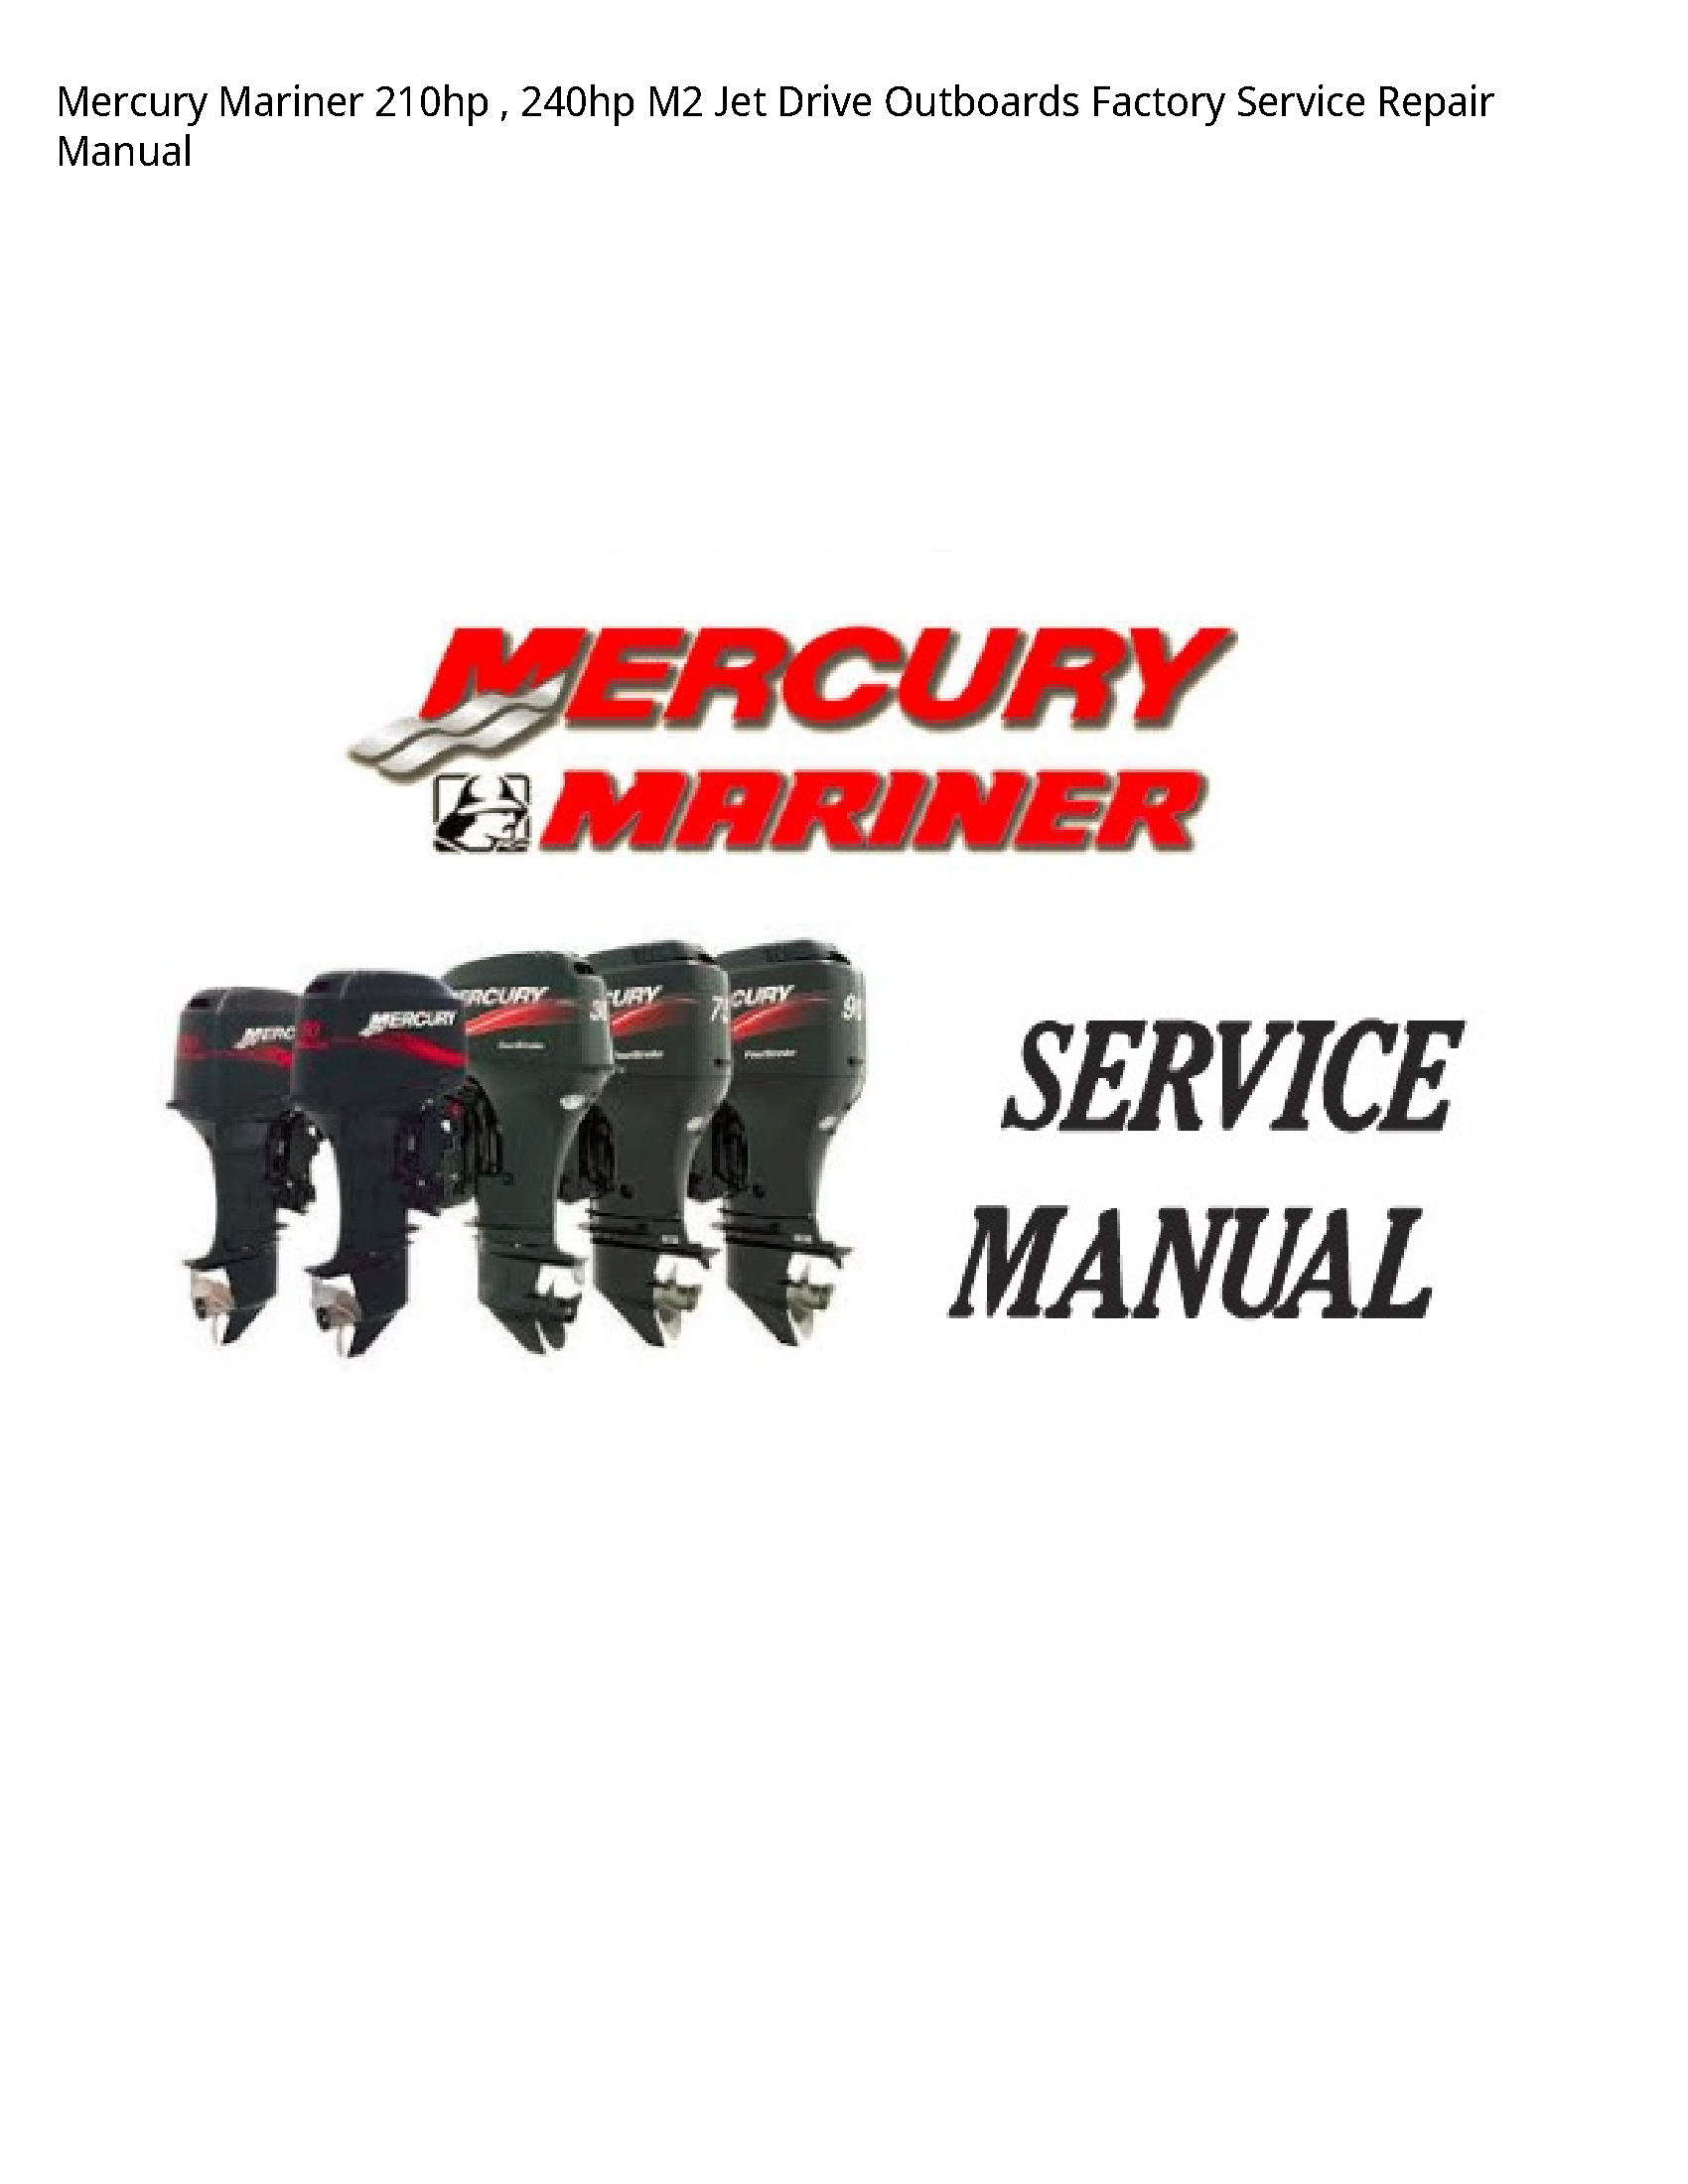 Mercury Mariner 210hp Jet Drive Outboards Factory manual